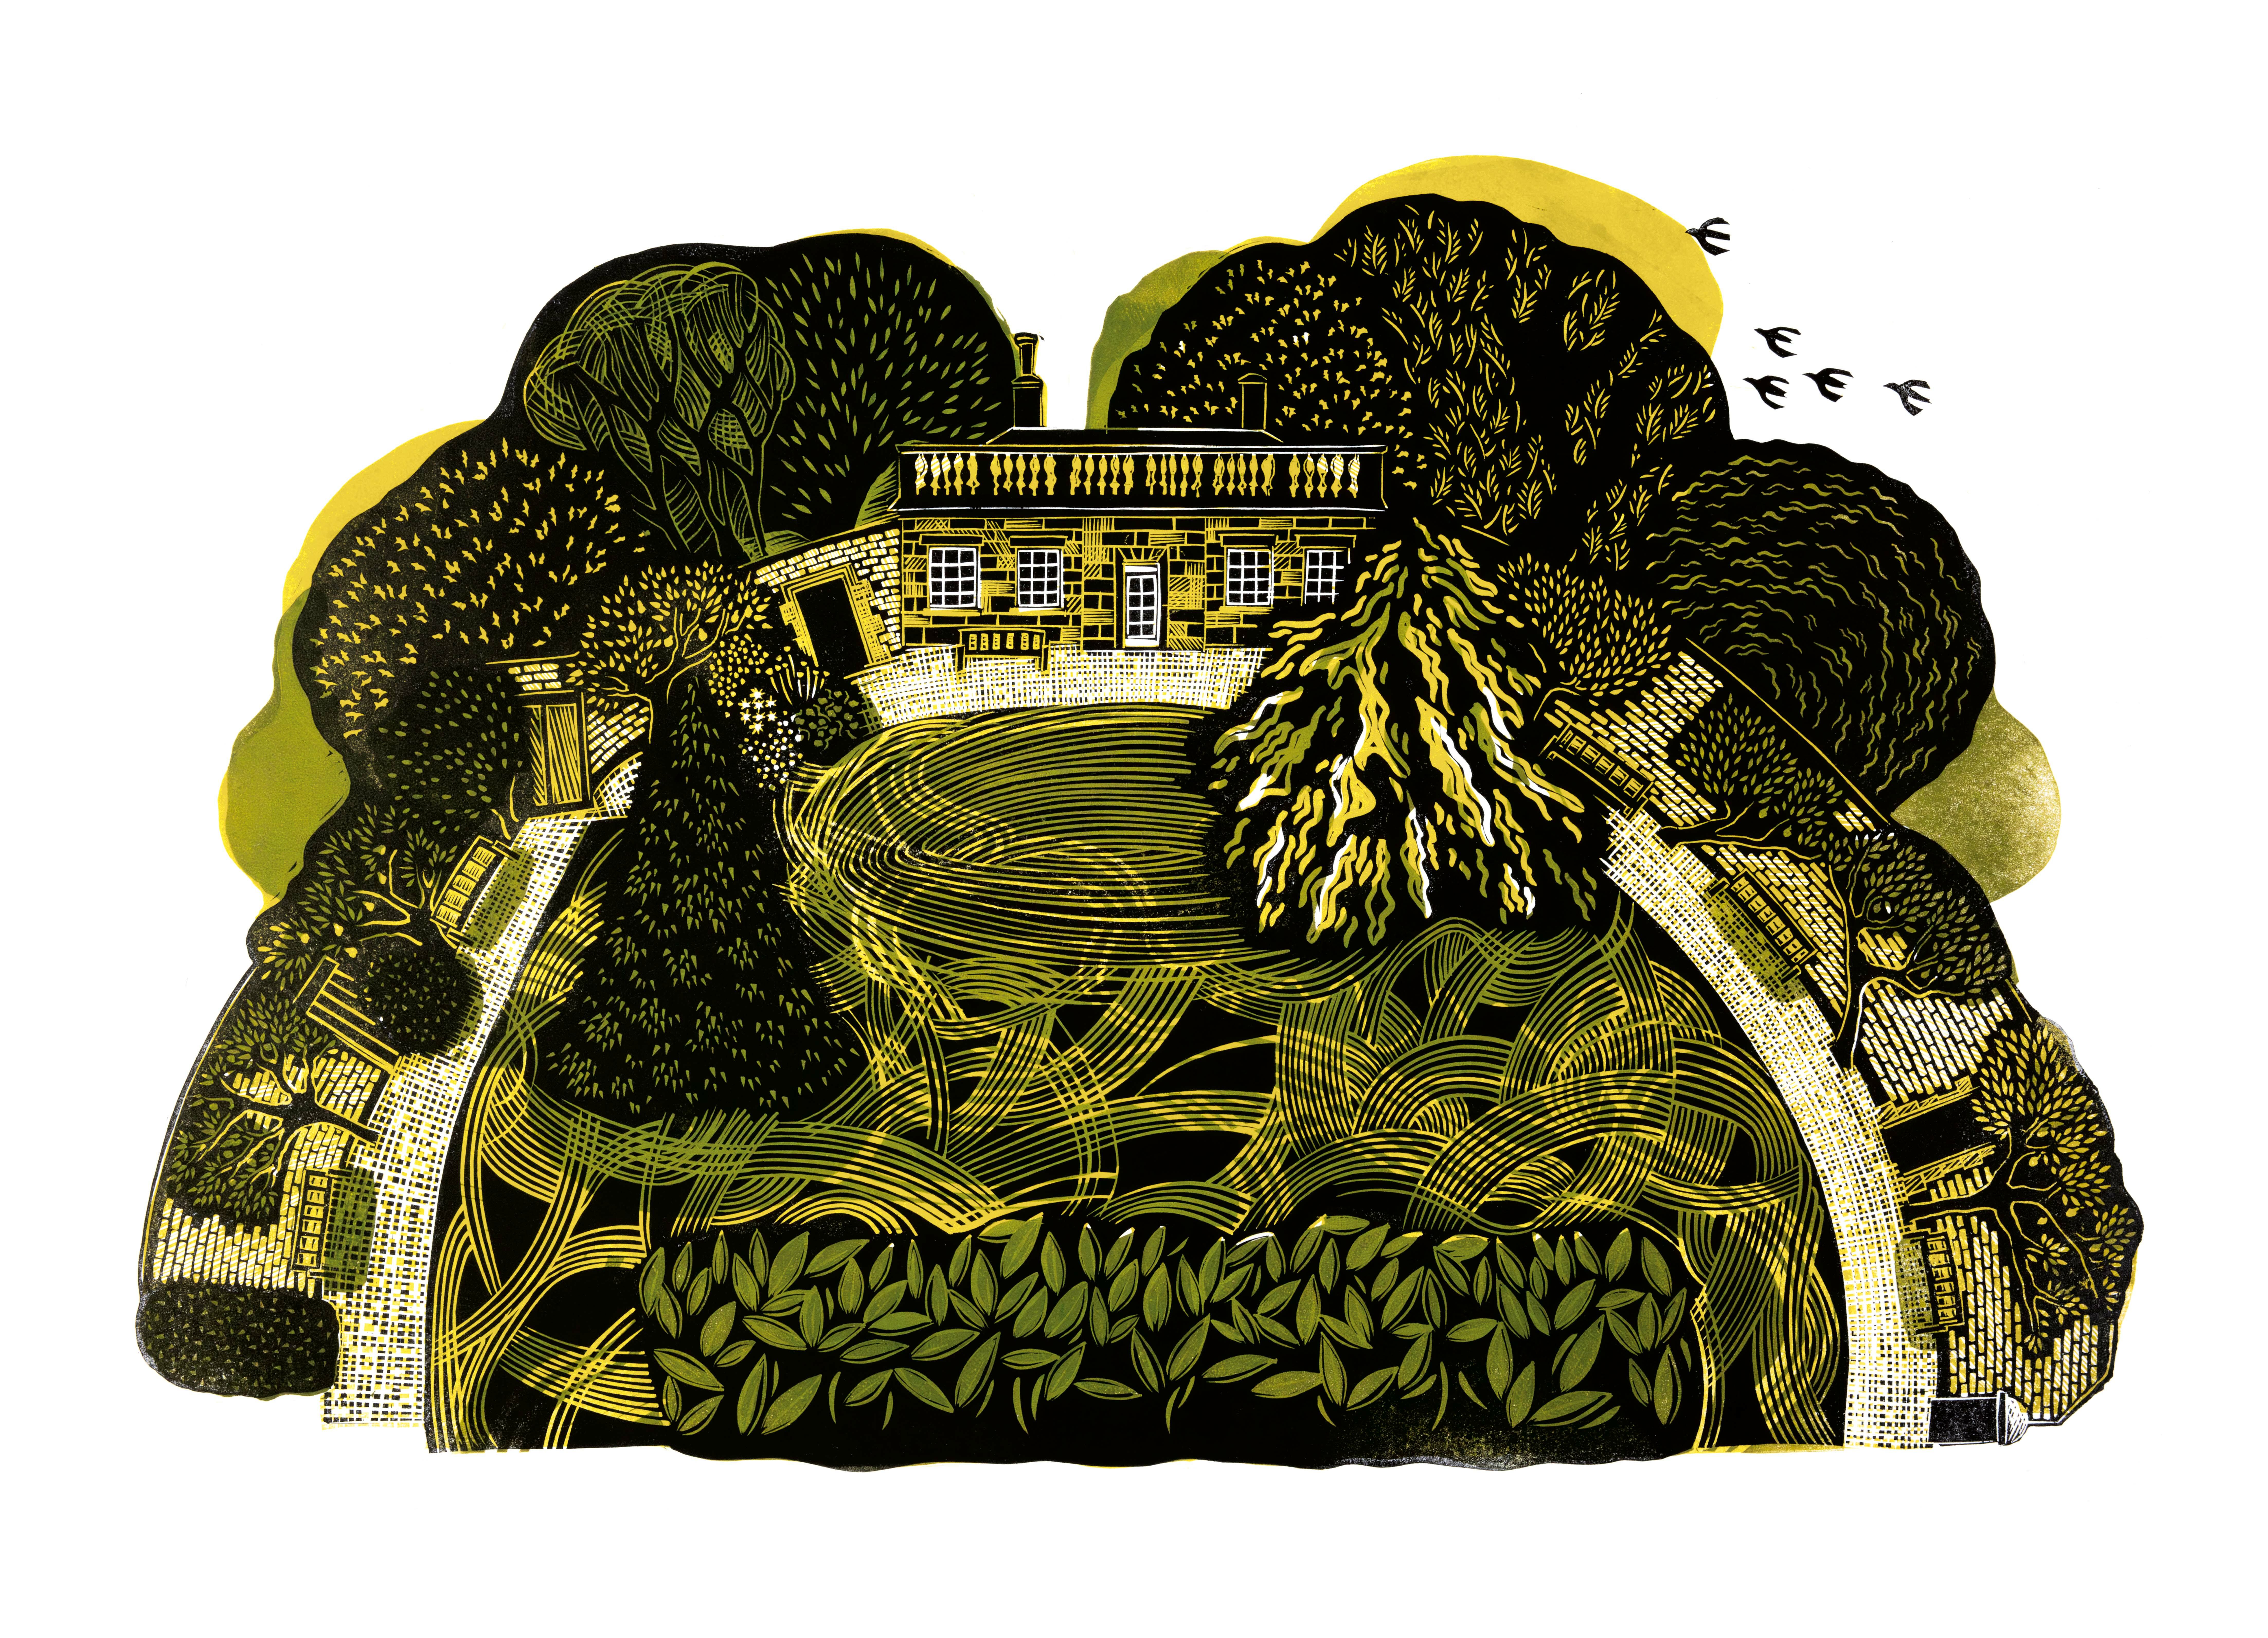 A lithograph print of a garden in shades of yellow and green